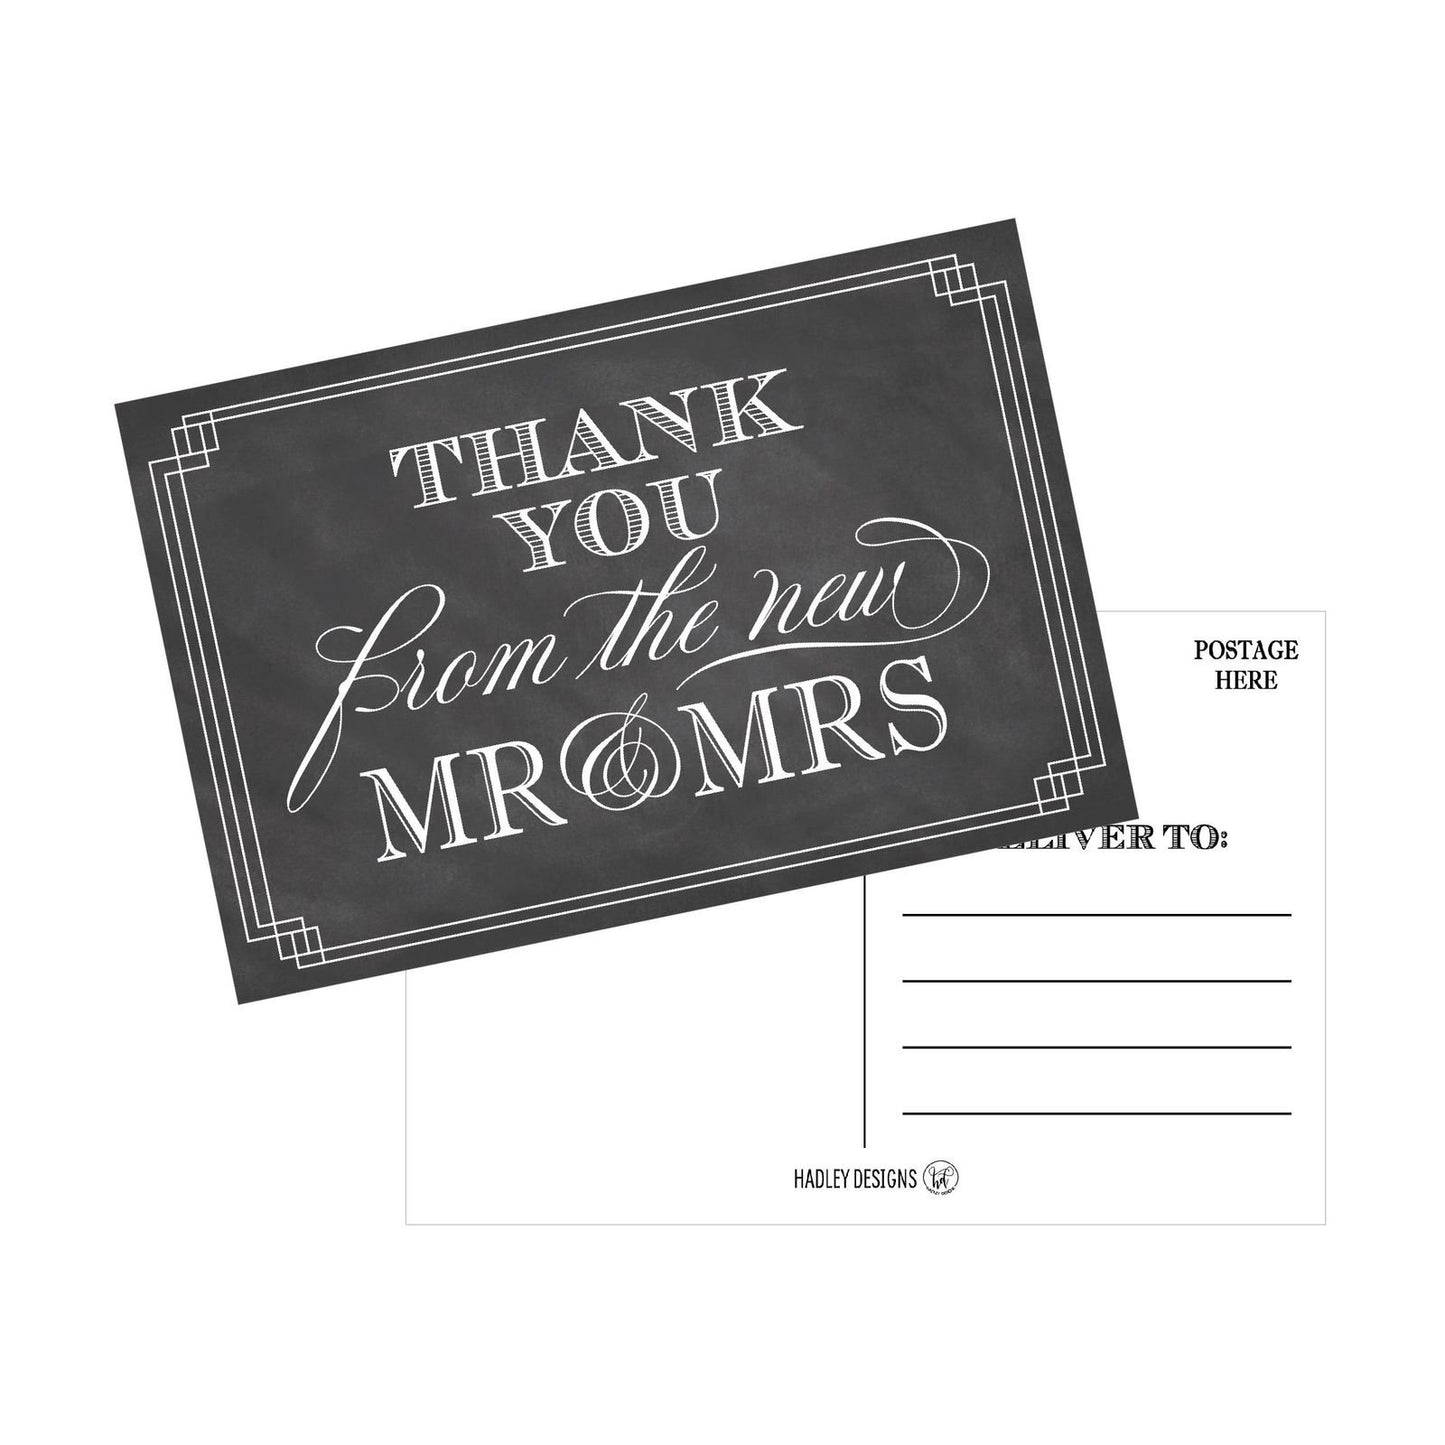 50 4x6 Chalkboard Rustic Thank You Postcards Bulk, Thank You Cards From The N...